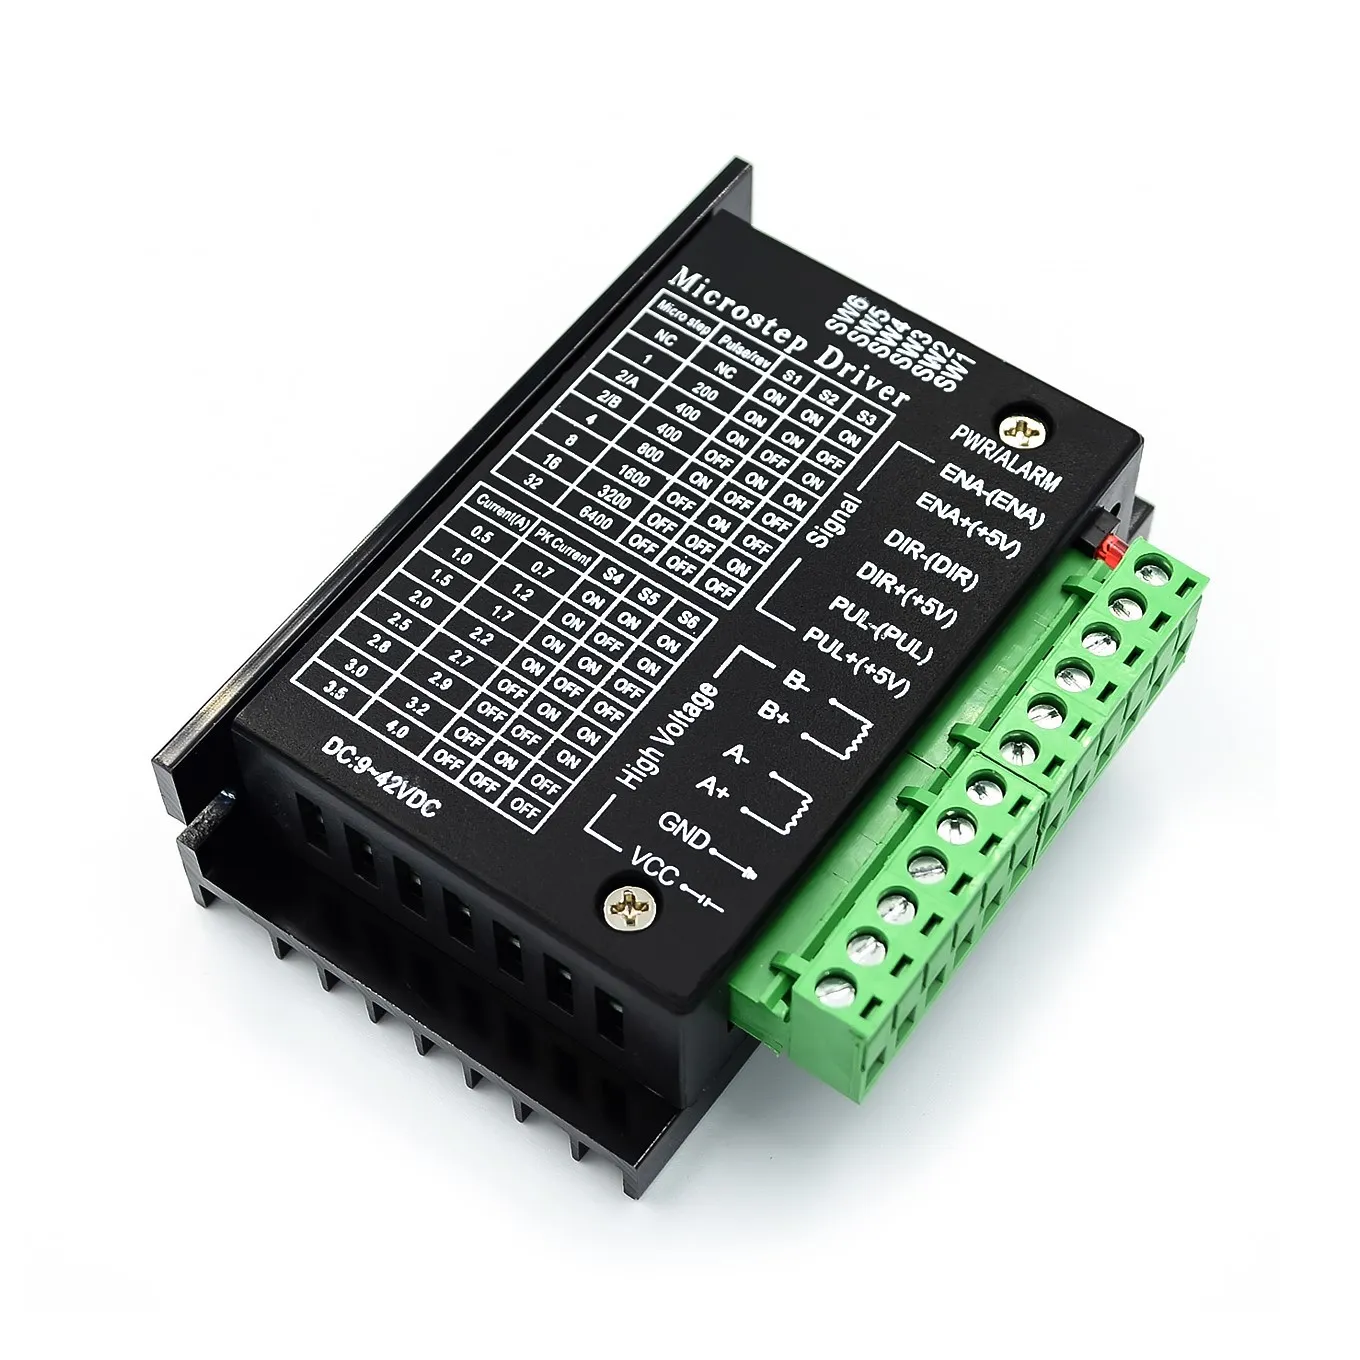 

TB6600 Stepper Motor Driver 4A 9~42V TTL 32 Micro-Step CNC 1 Axis NEW 2 or 4 Phase of Stepper Moto 42, 57, 86